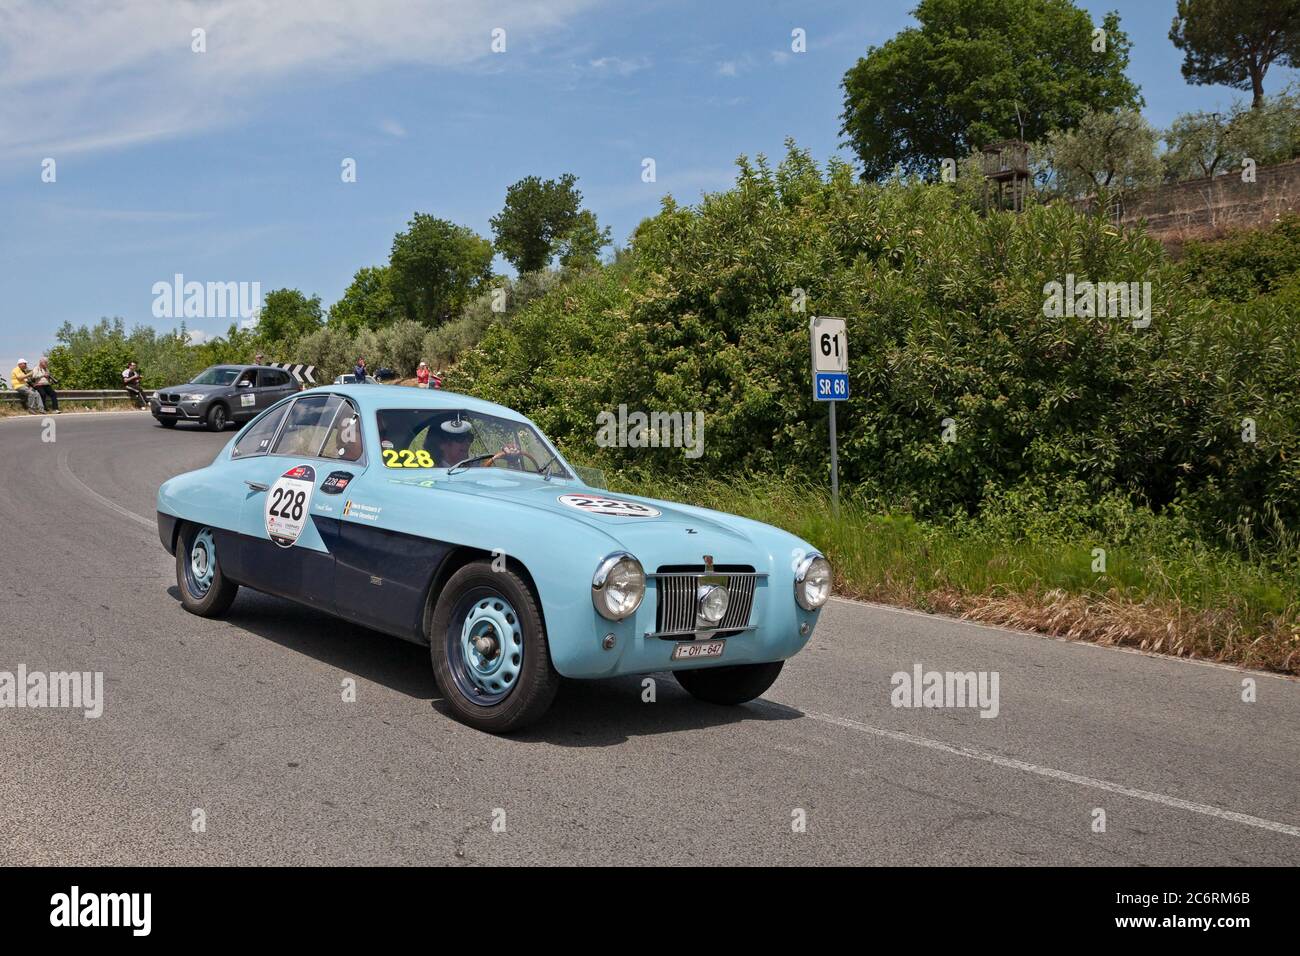 Vintage Fiat 1100 E Zagato Coupe (1952) in classic car race Mille Miglia, on May 17, 2014 in Colle di Val d'Elsa, Tuscany, Italy Stock Photo